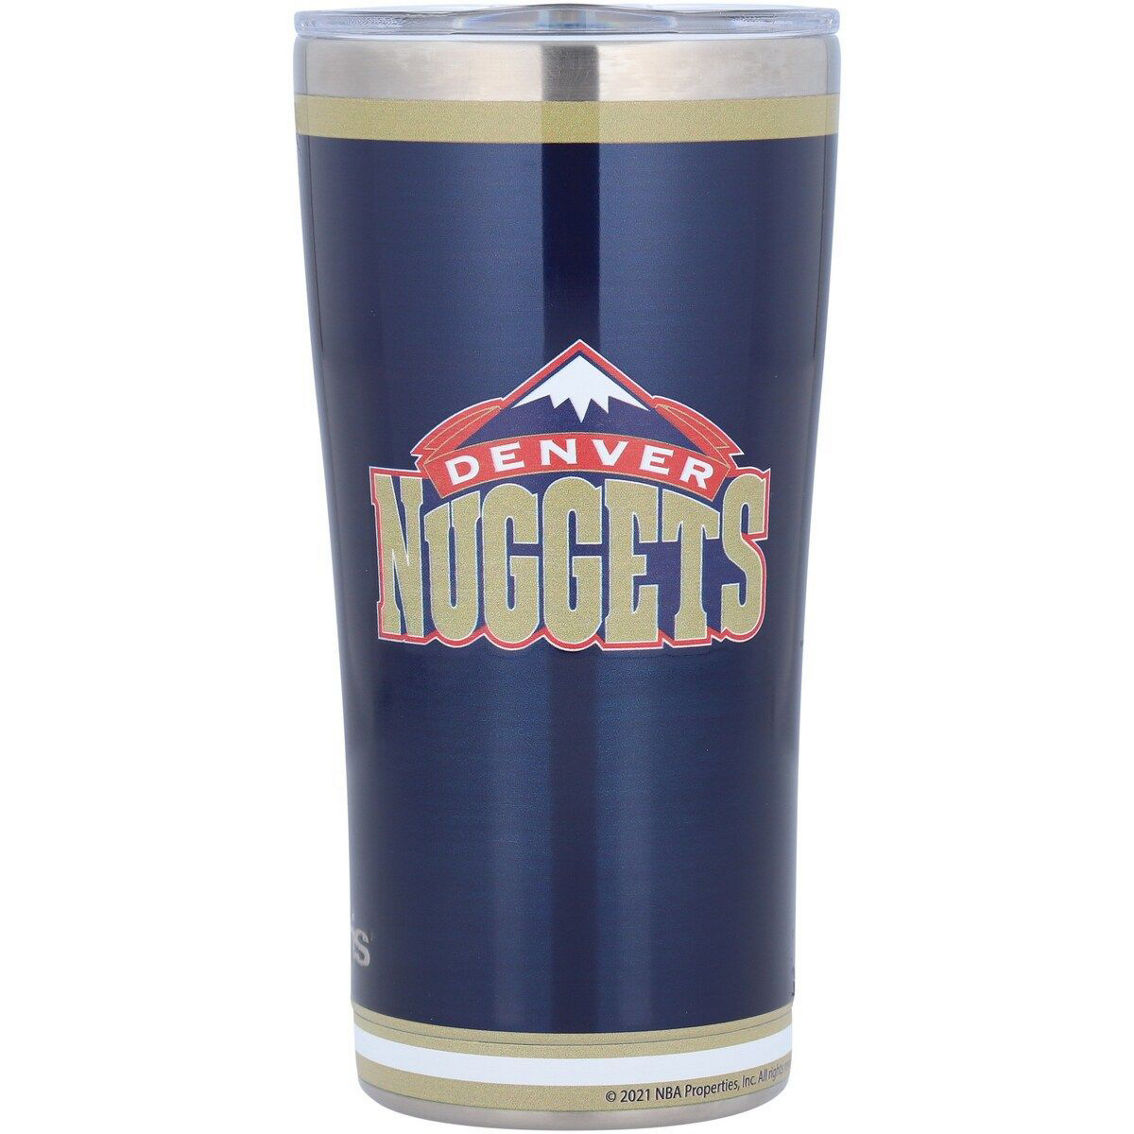 Tervis Denver Nuggets 20oz. Retro Stainless Steel Tumbler - Image 3 of 3